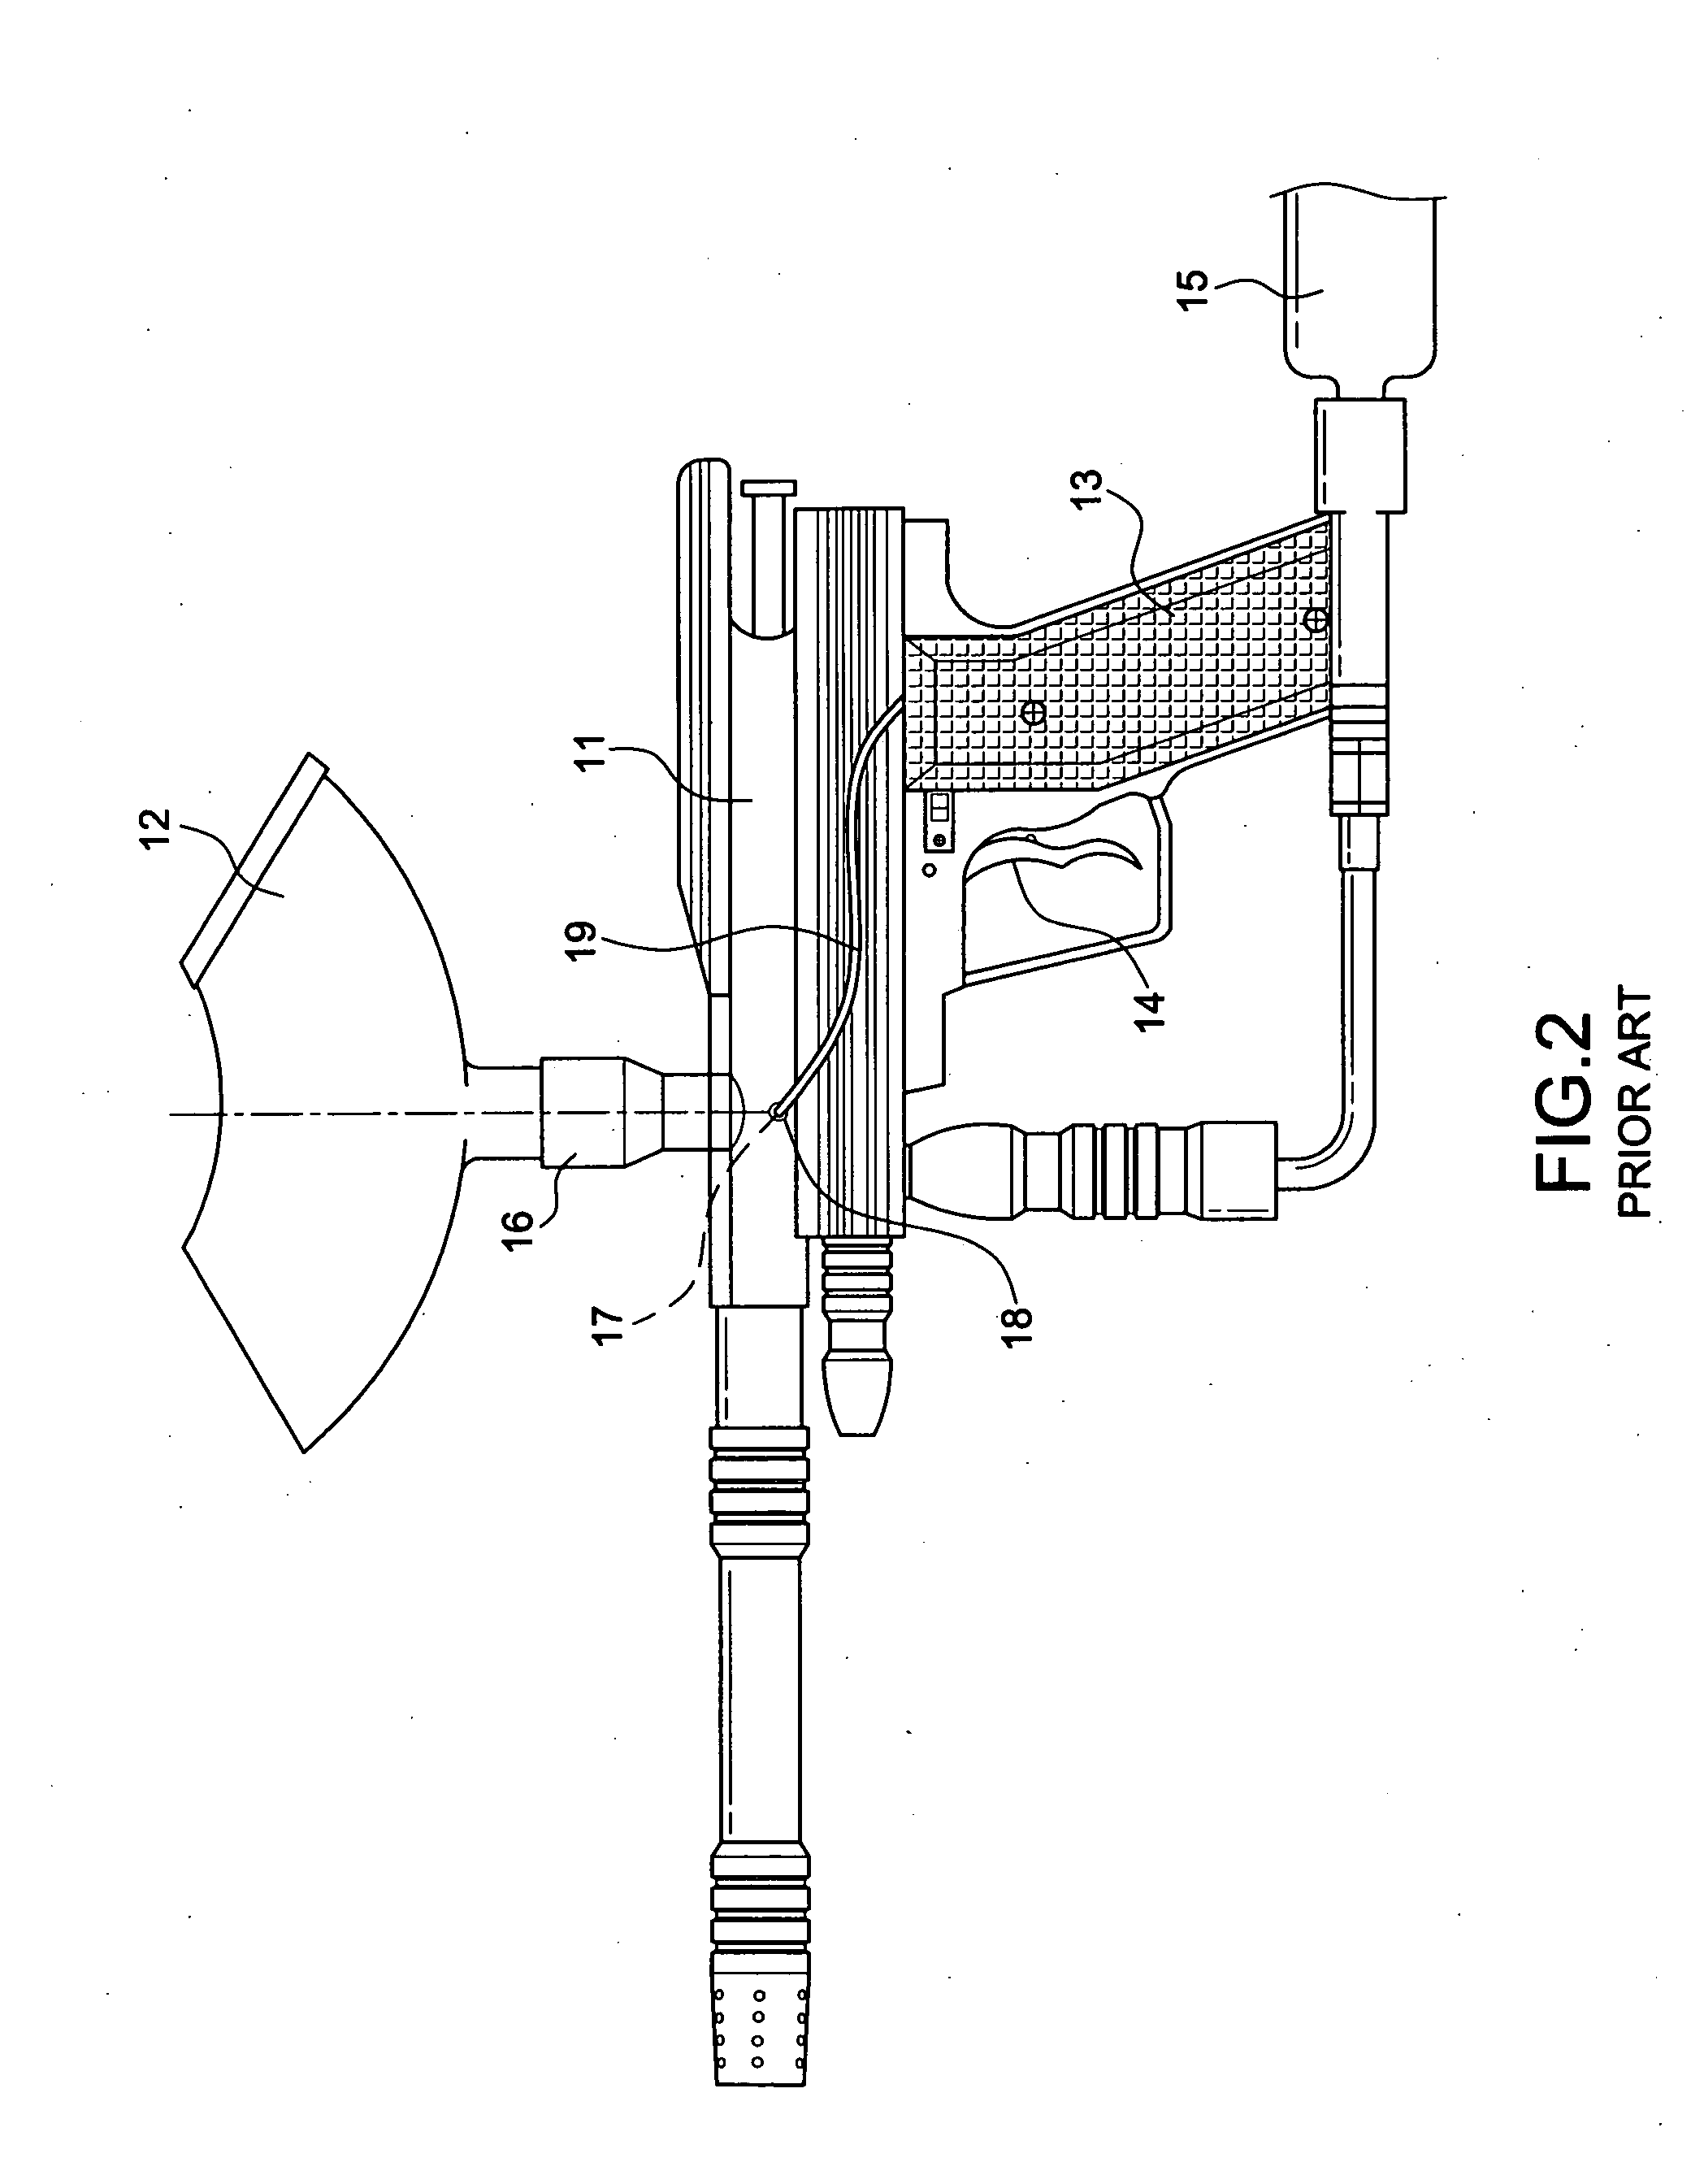 Apparatus for detecting the position of the paintball of a paintball gun